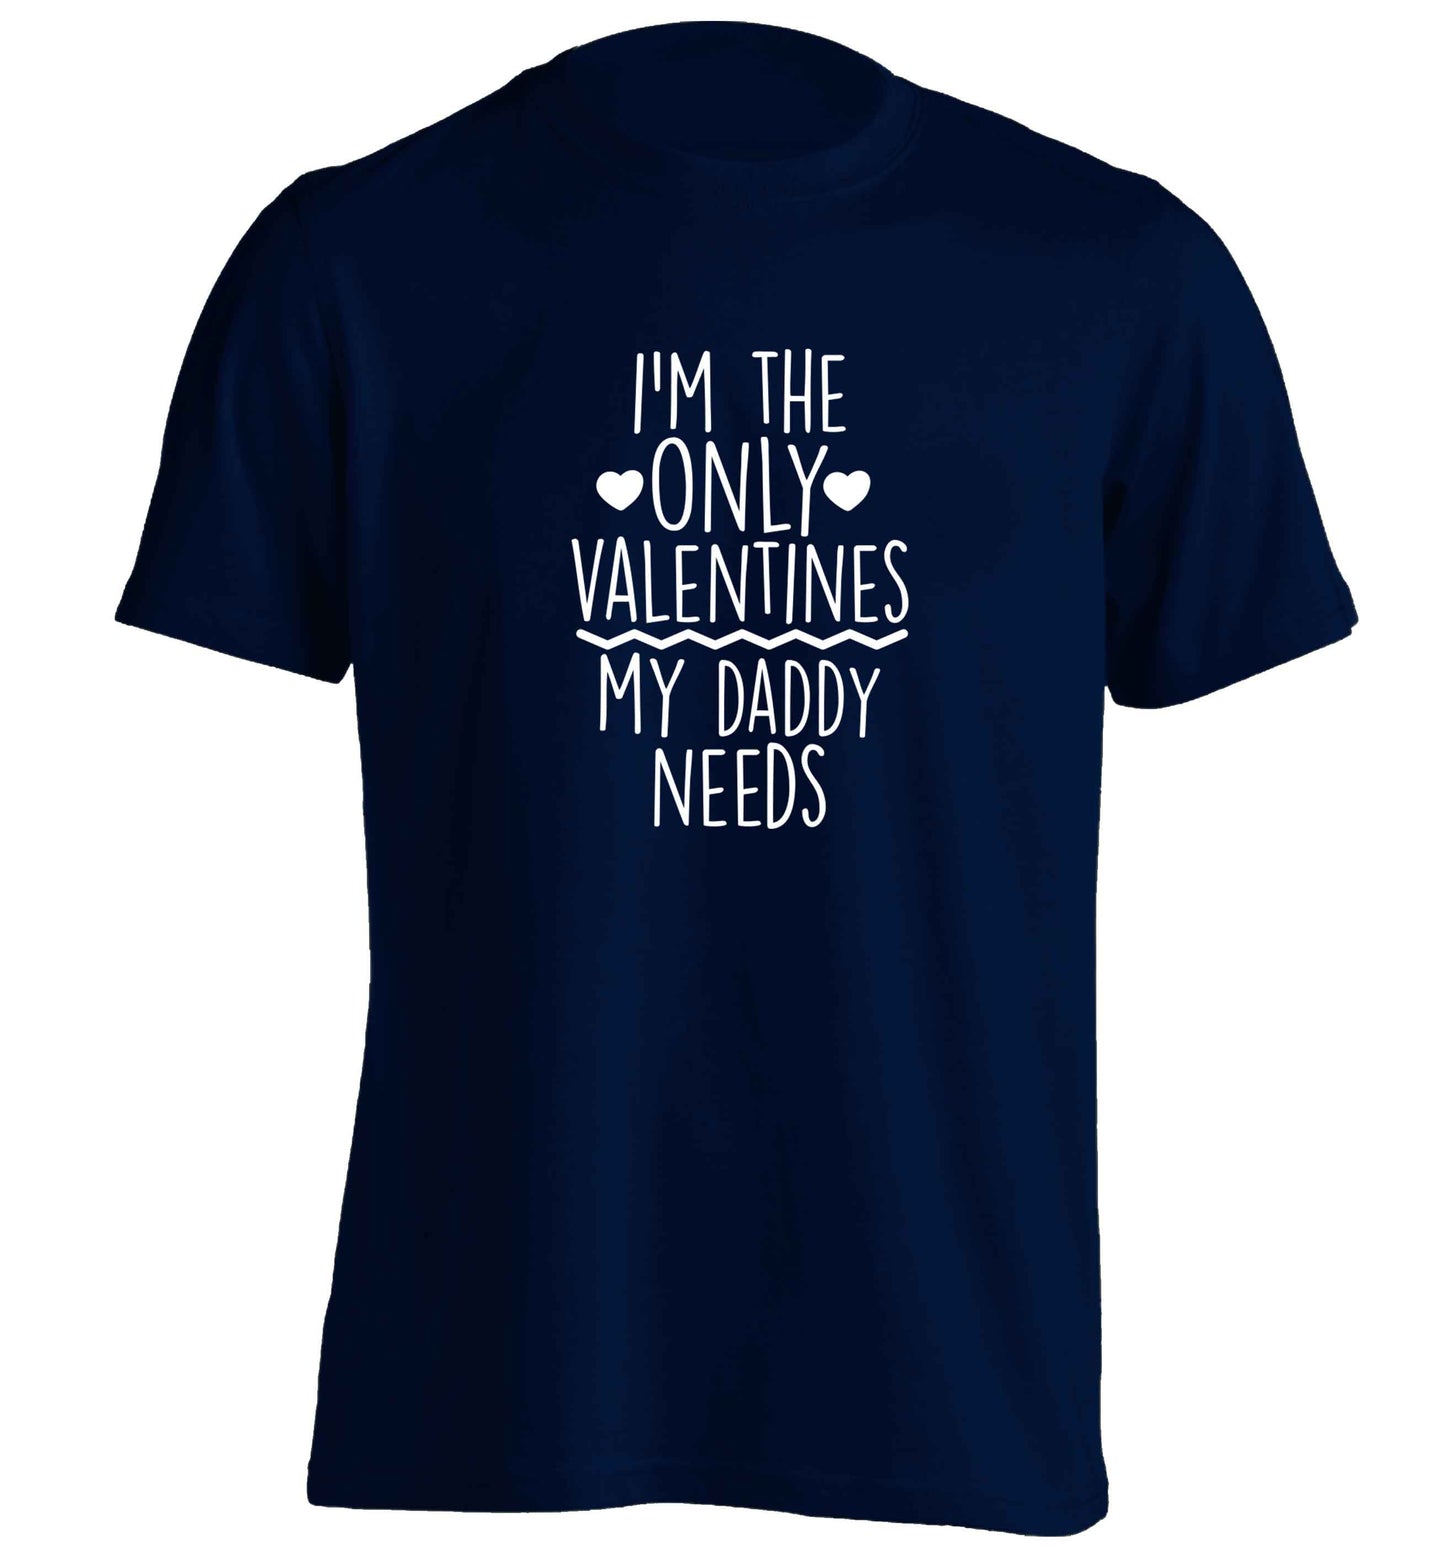 I'm the only valentines my daddy needs adults unisex navy Tshirt 2XL